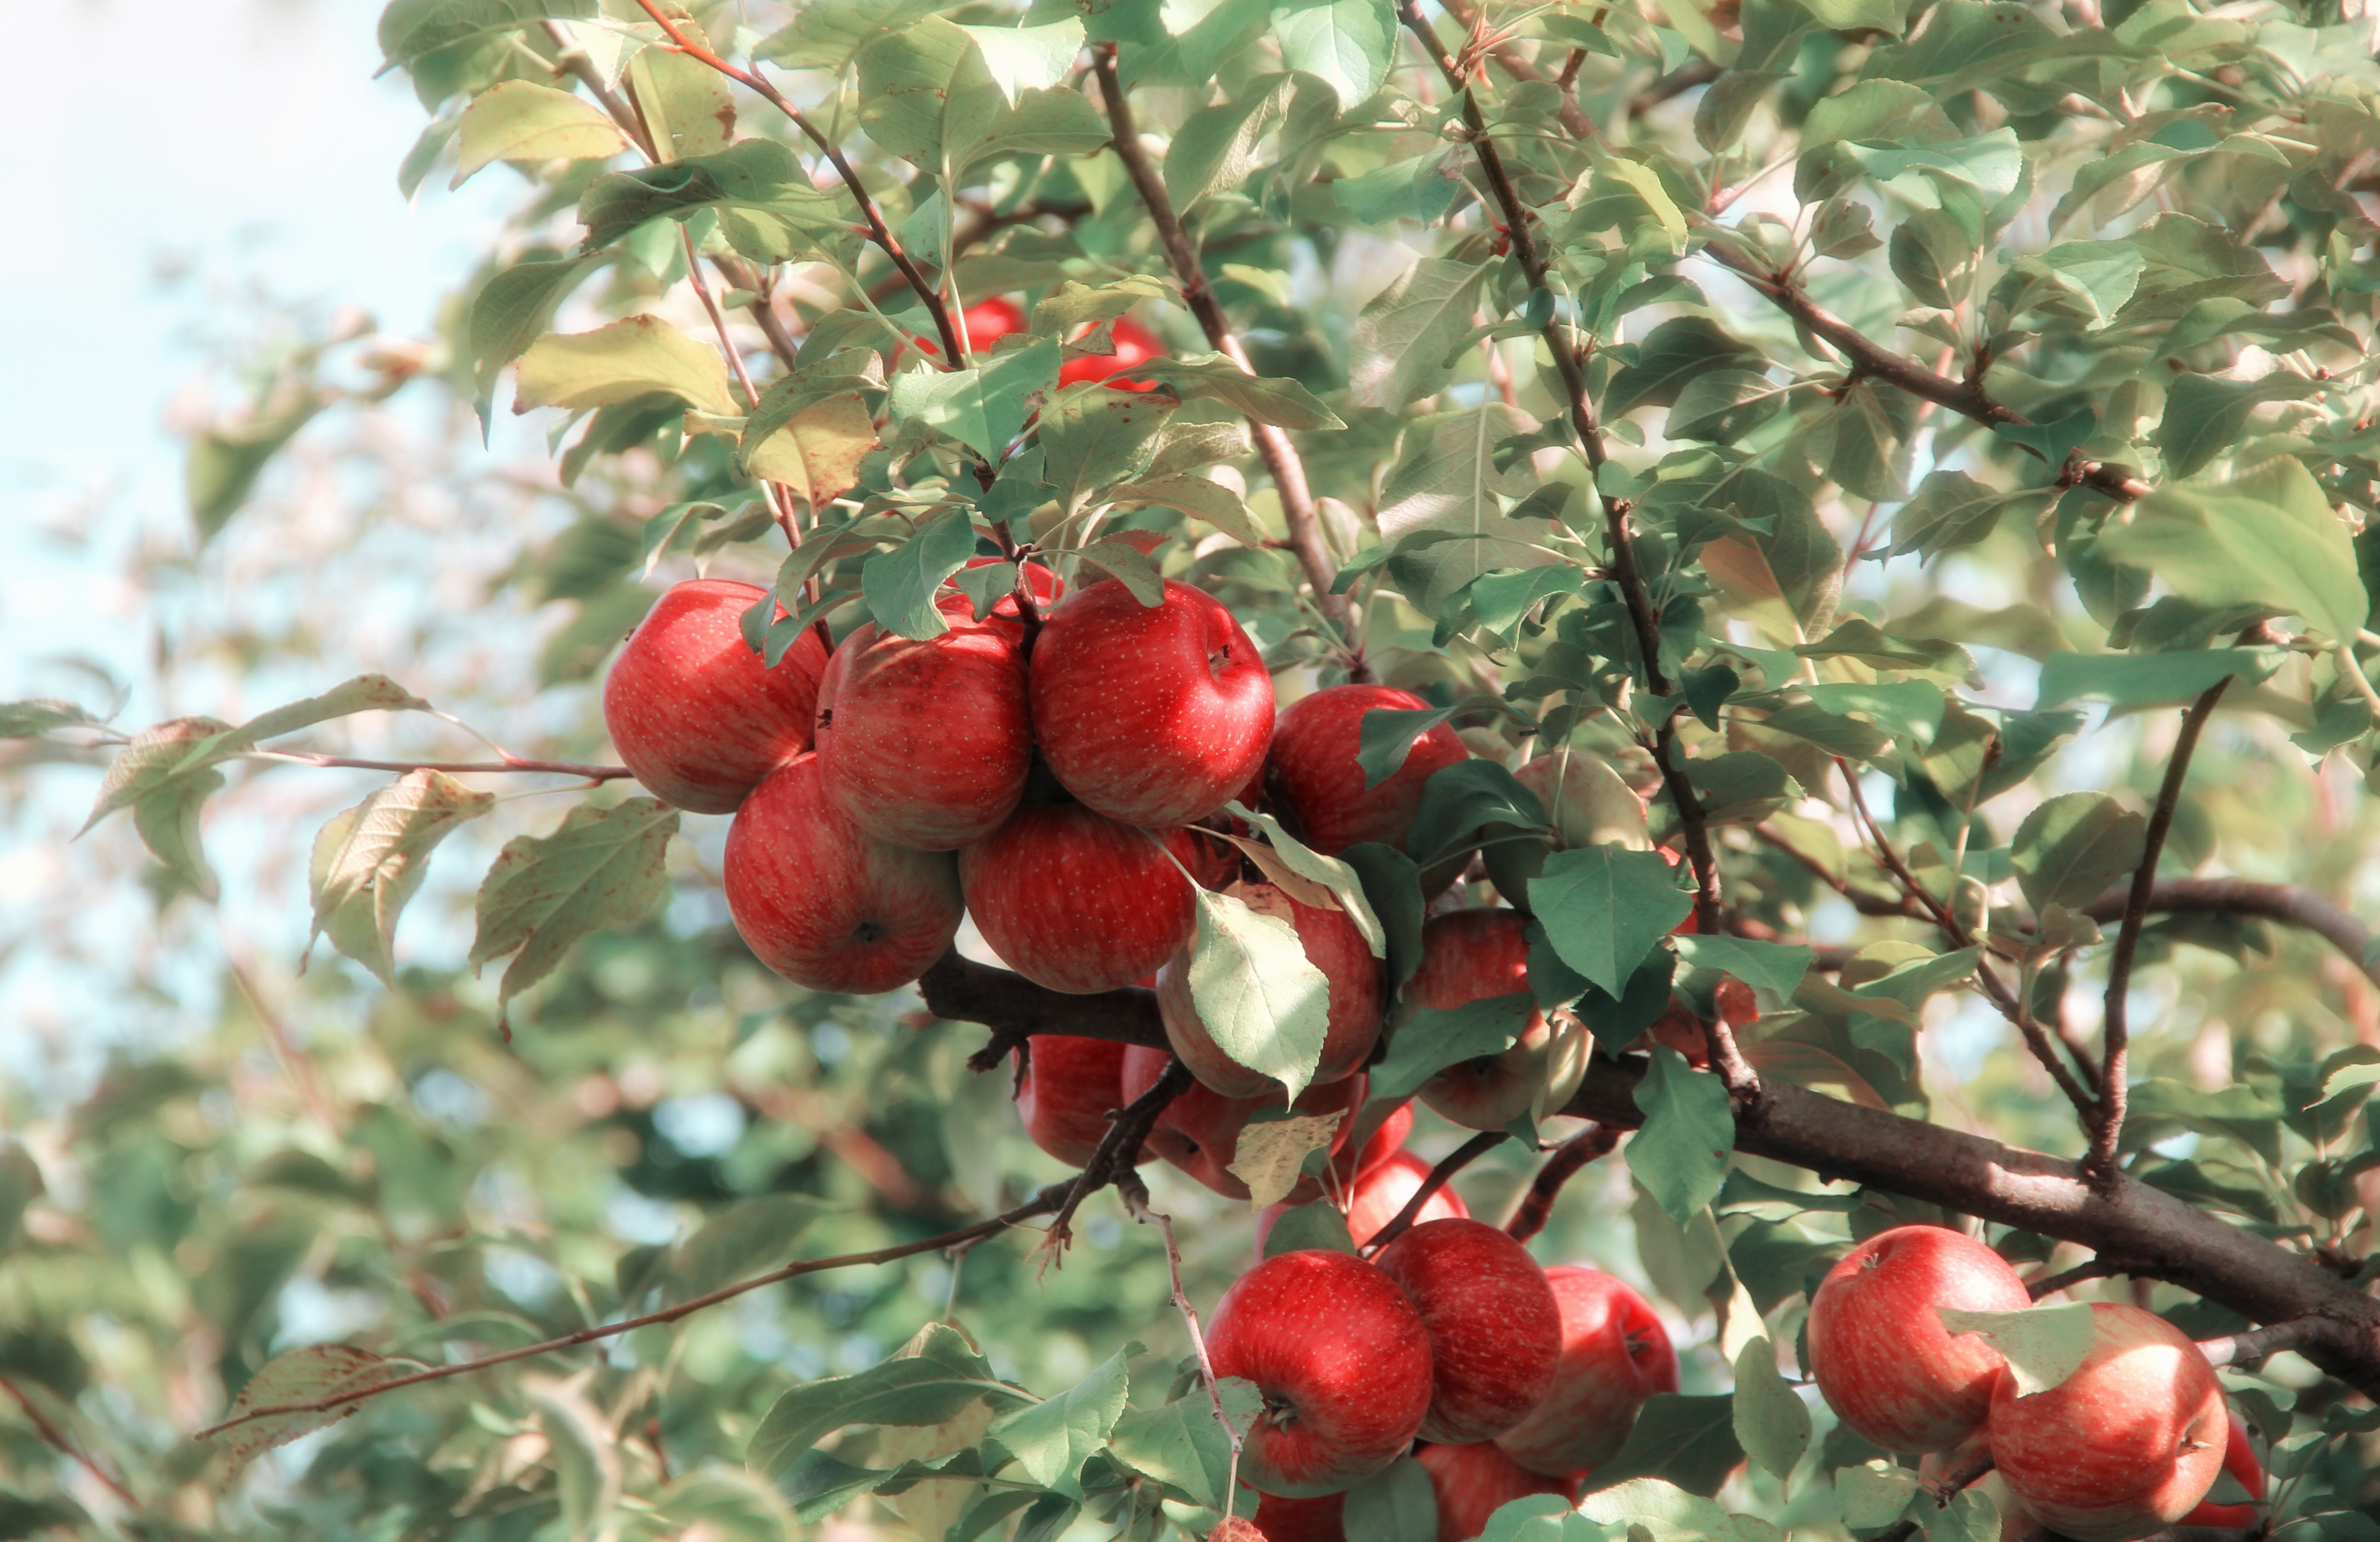 Ripe red apples on tree in orchard with sunlight filtering through leaves